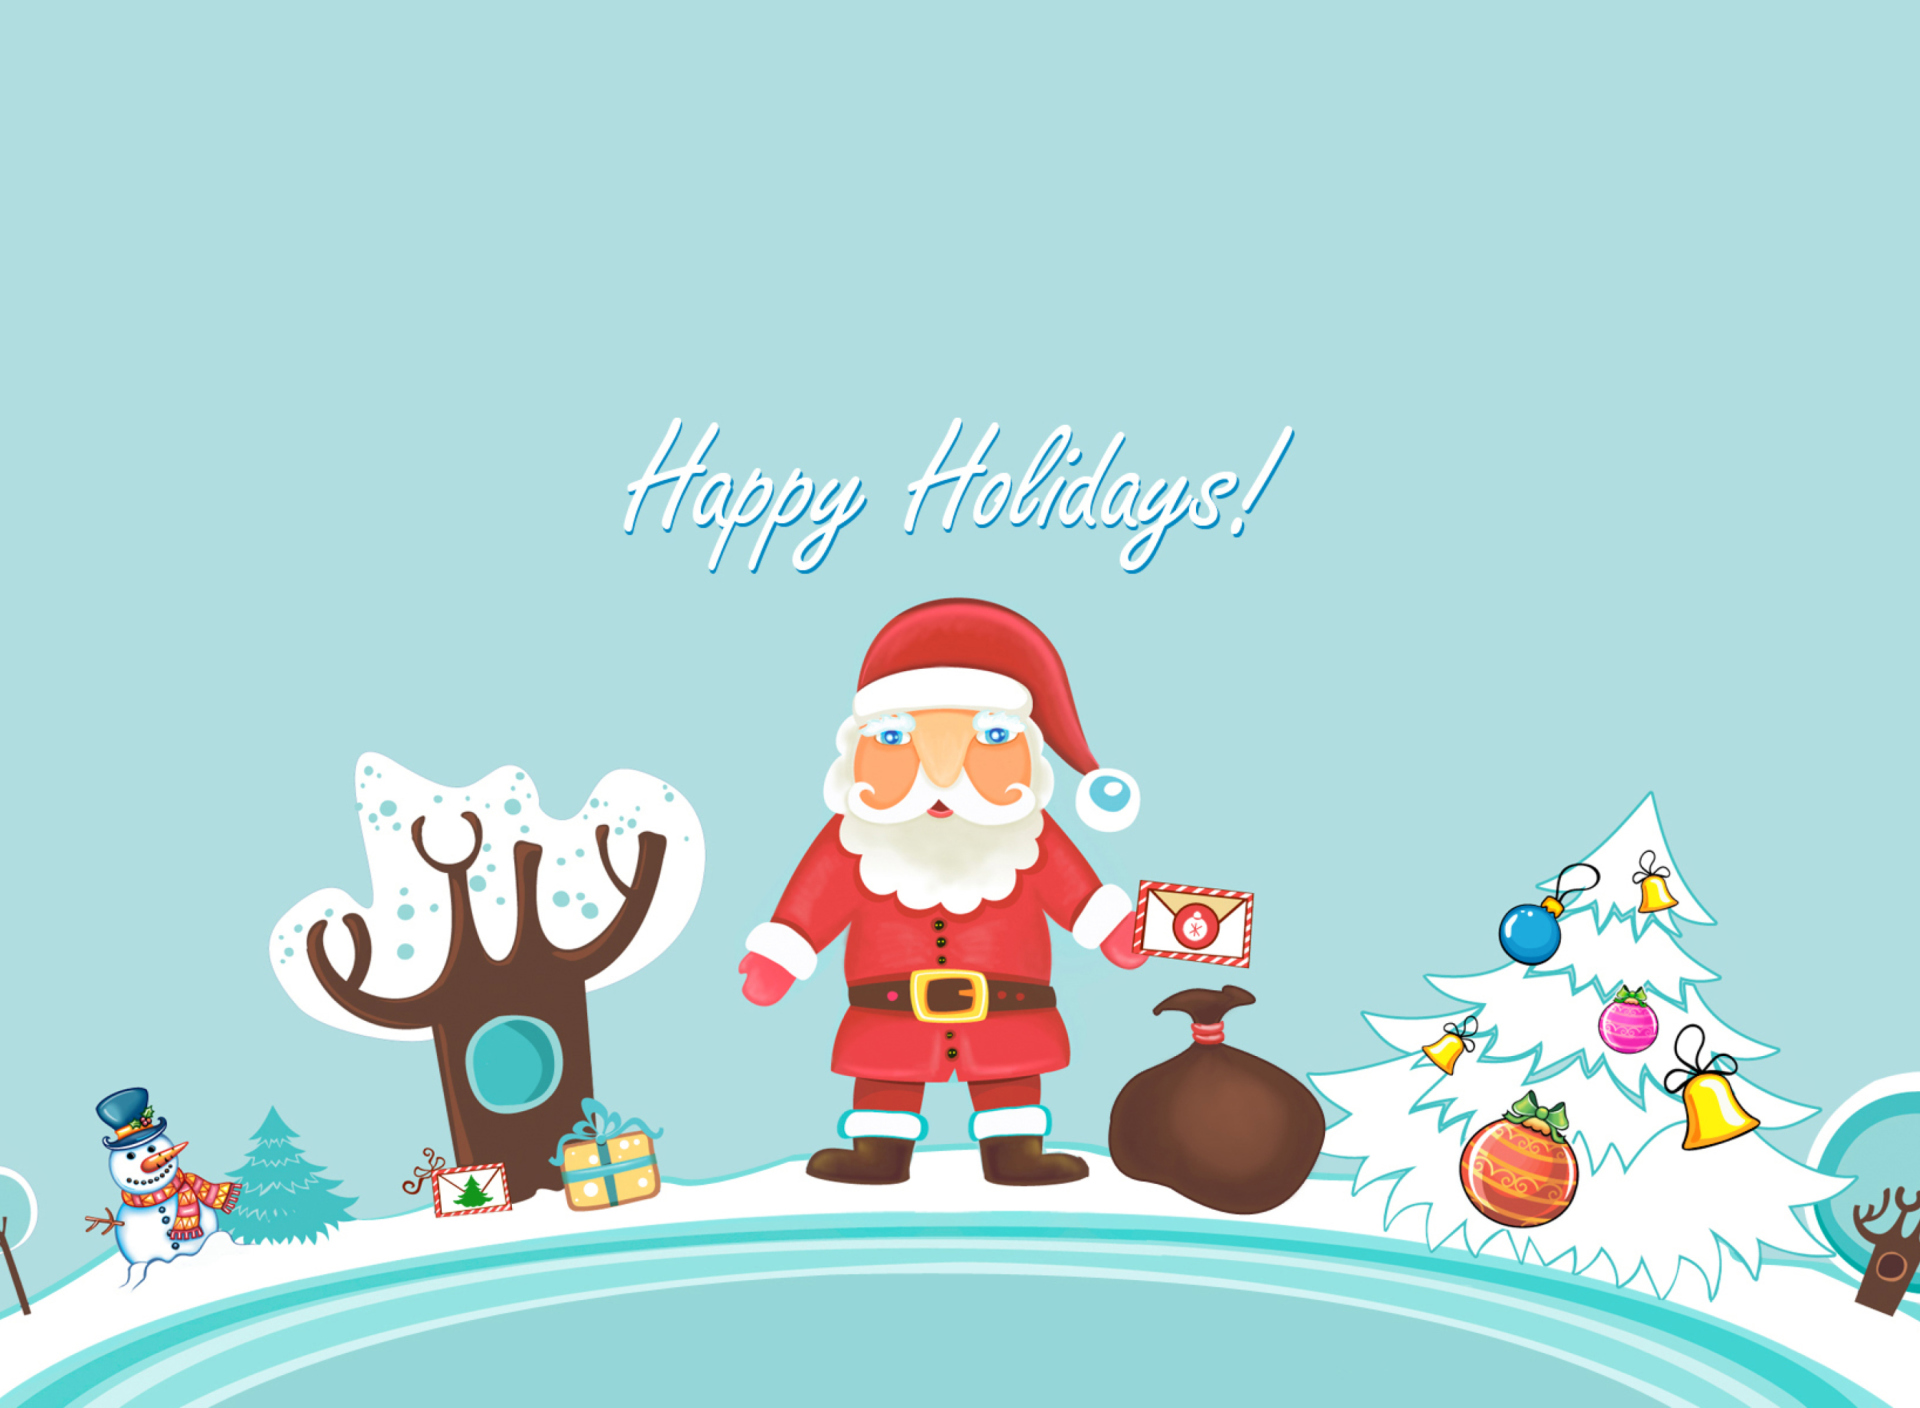 Santa Claus Wishes You Happy Holidays wallpaper 1920x1408